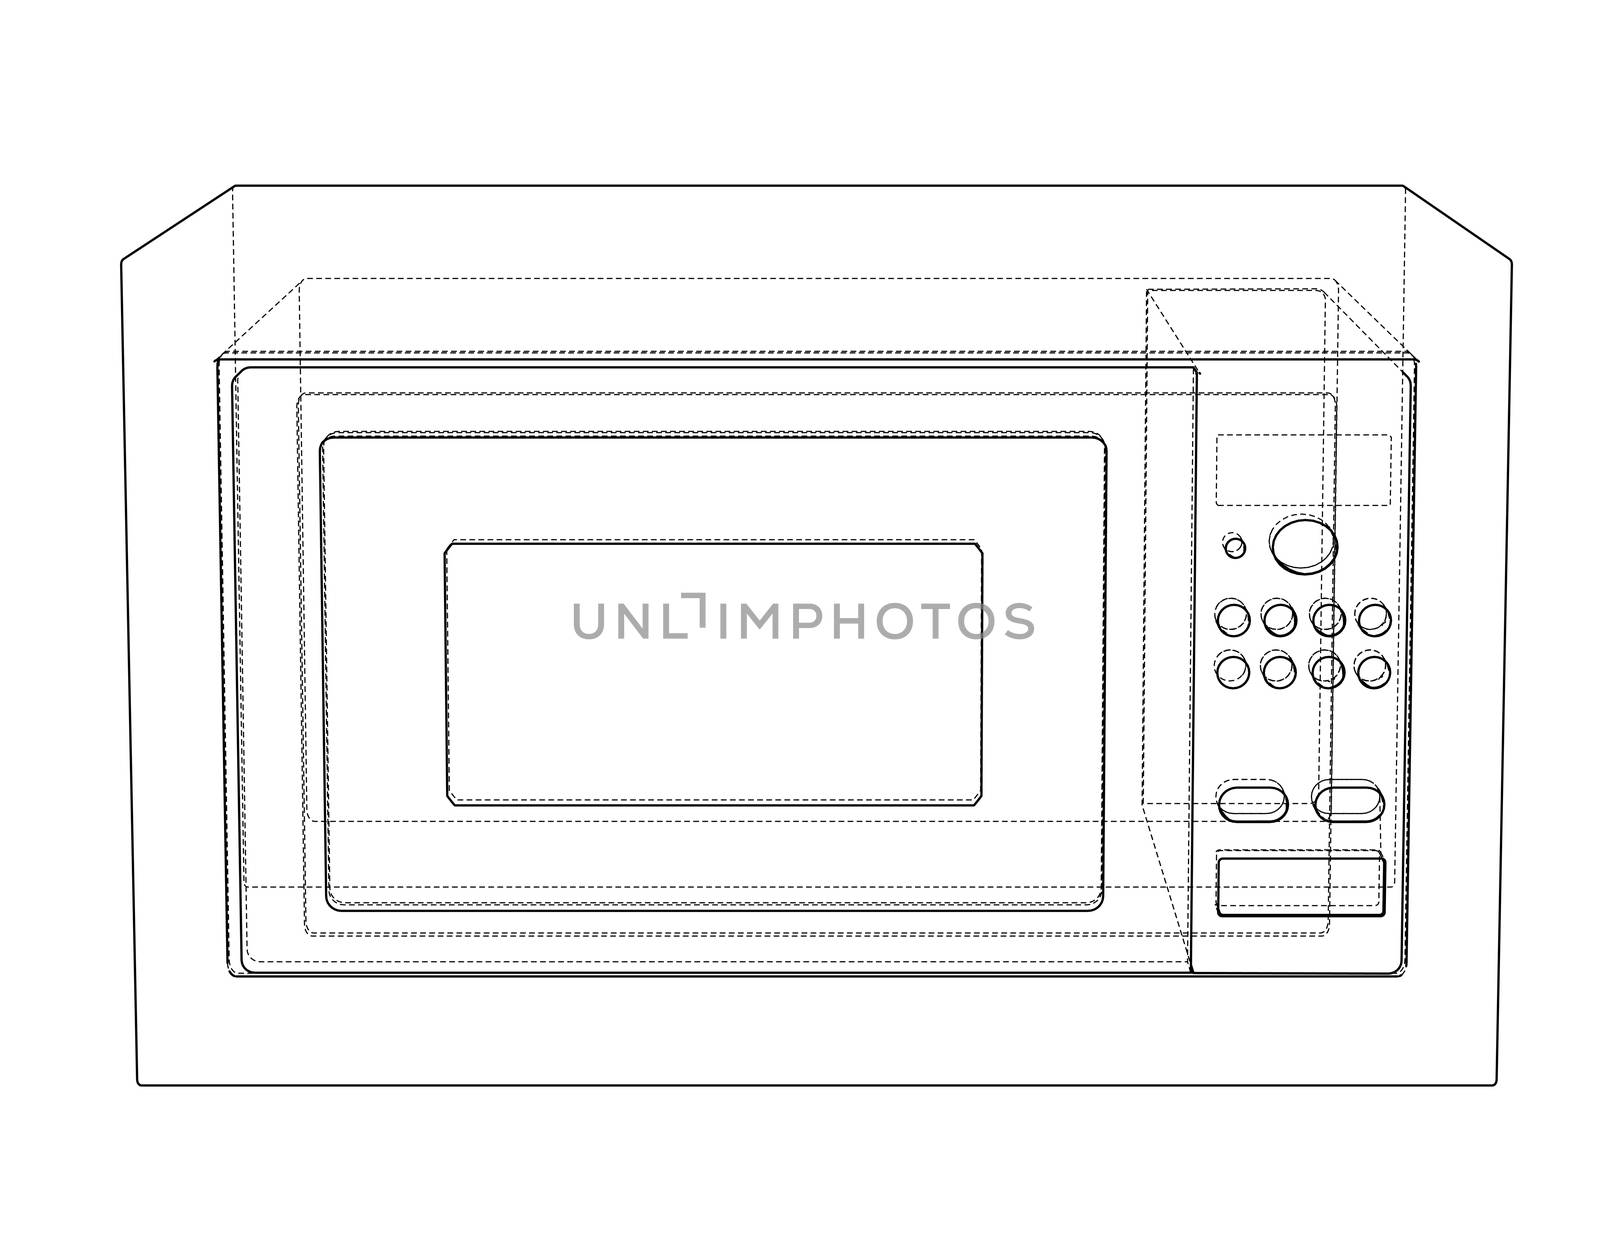 Microwave concept. 3d illustration. Blueprint or Wire-frame style